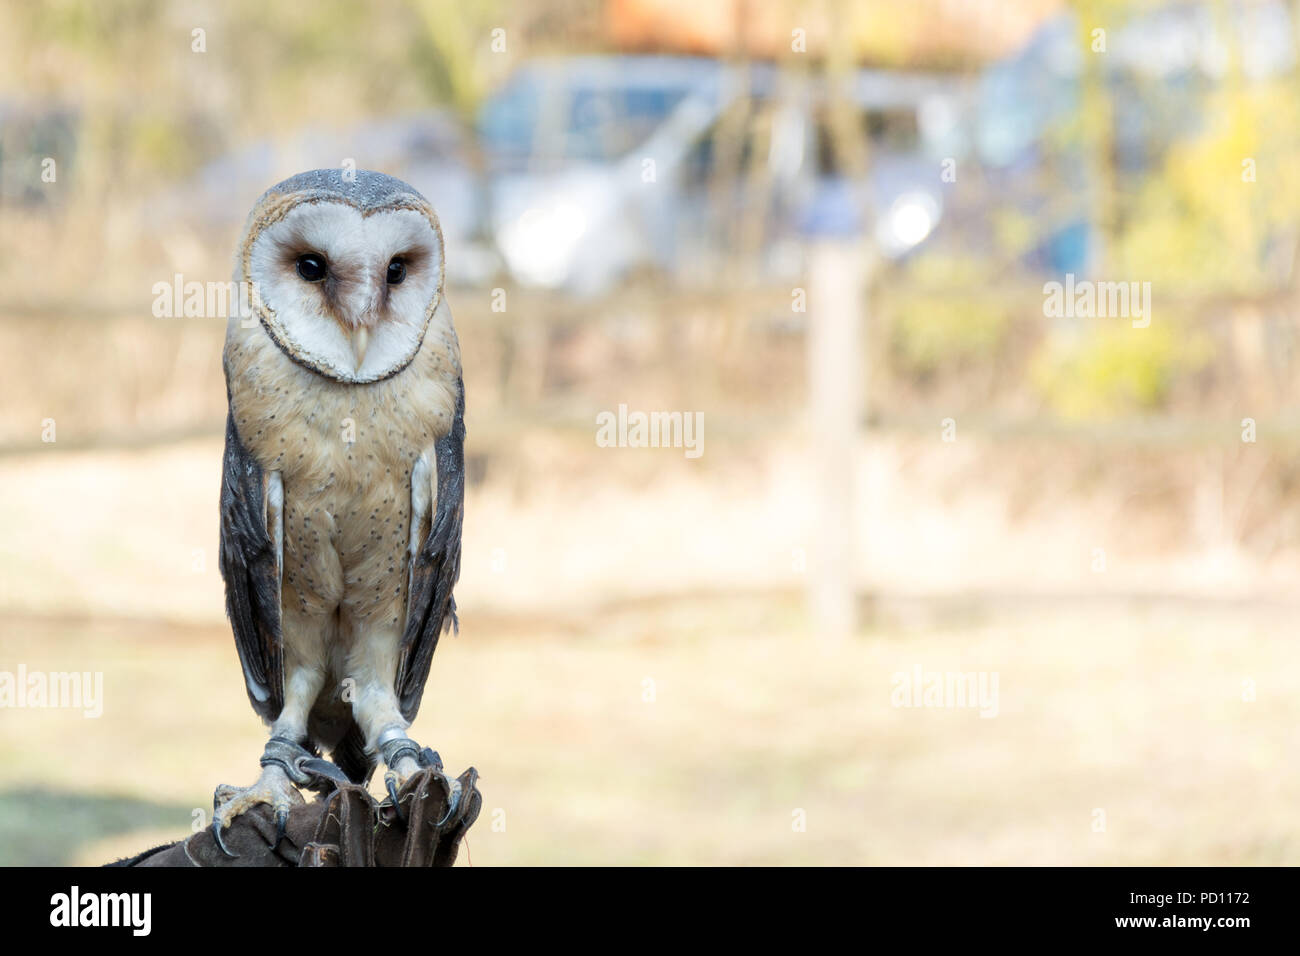 Magnificent owl bird sits on the hand Stock Photo